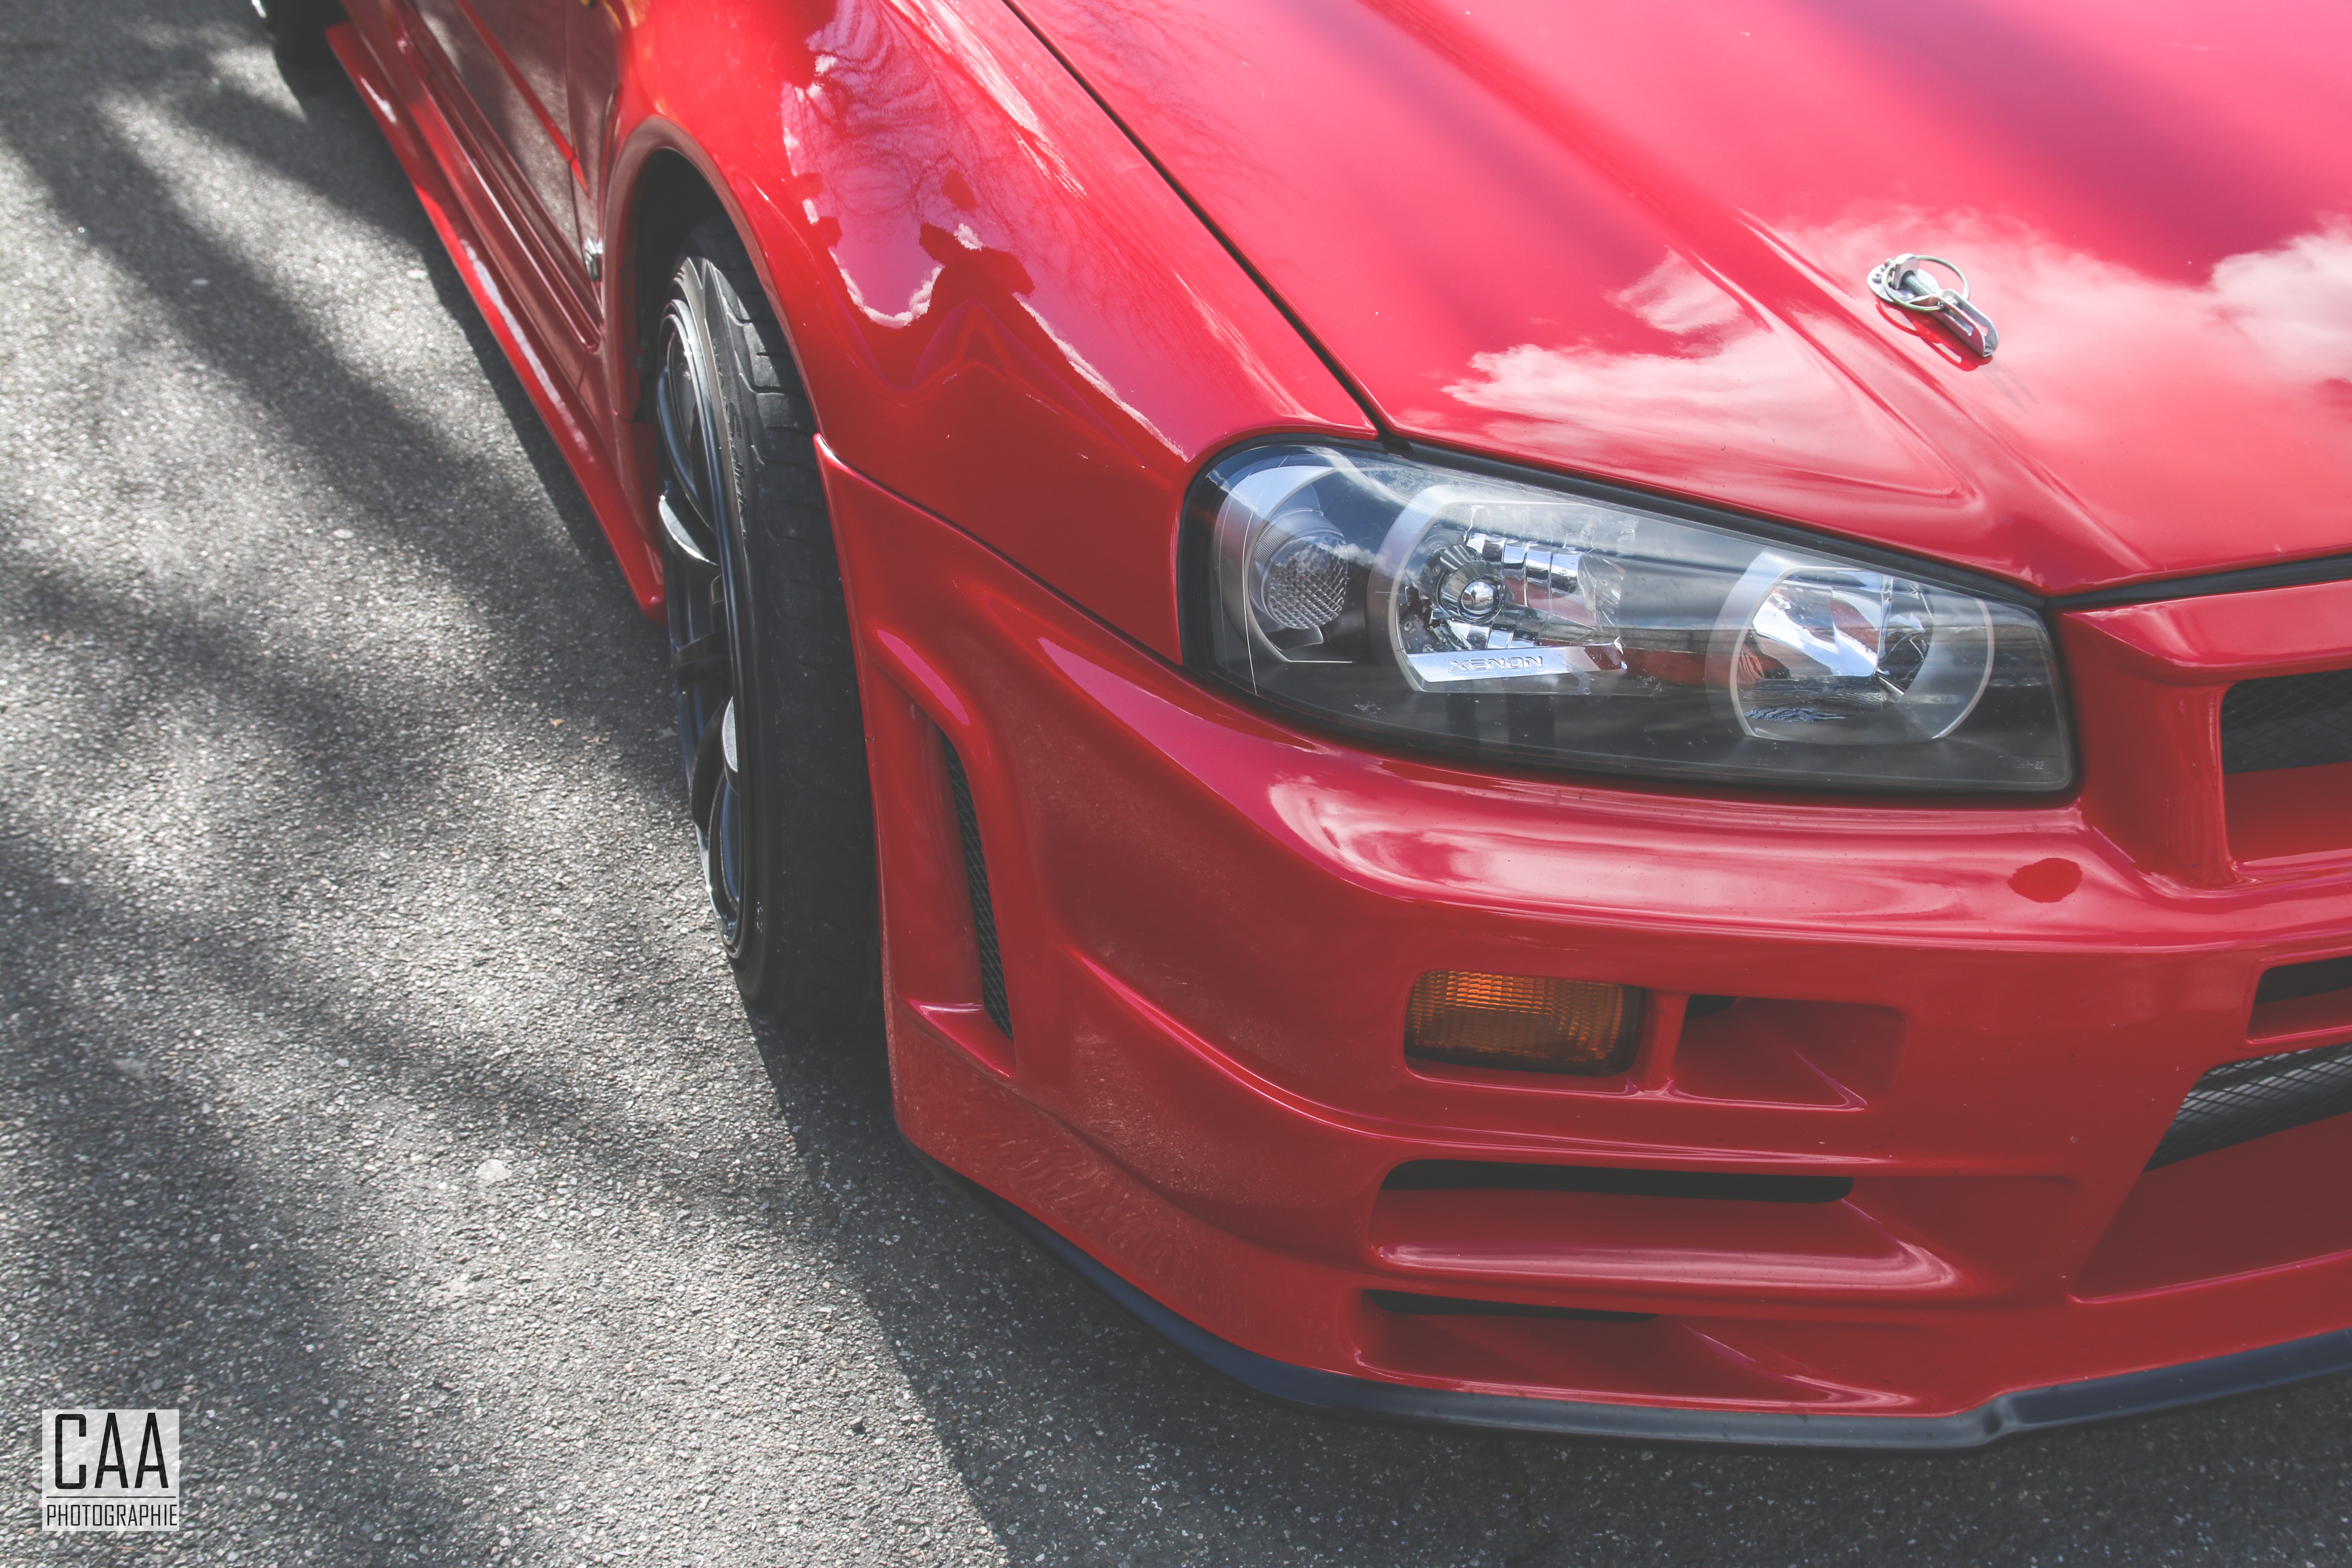 General 5472x3648 car Nissan vehicle red cars Nissan Skyline Nissan Skyline R34 active red Japanese cars closeup